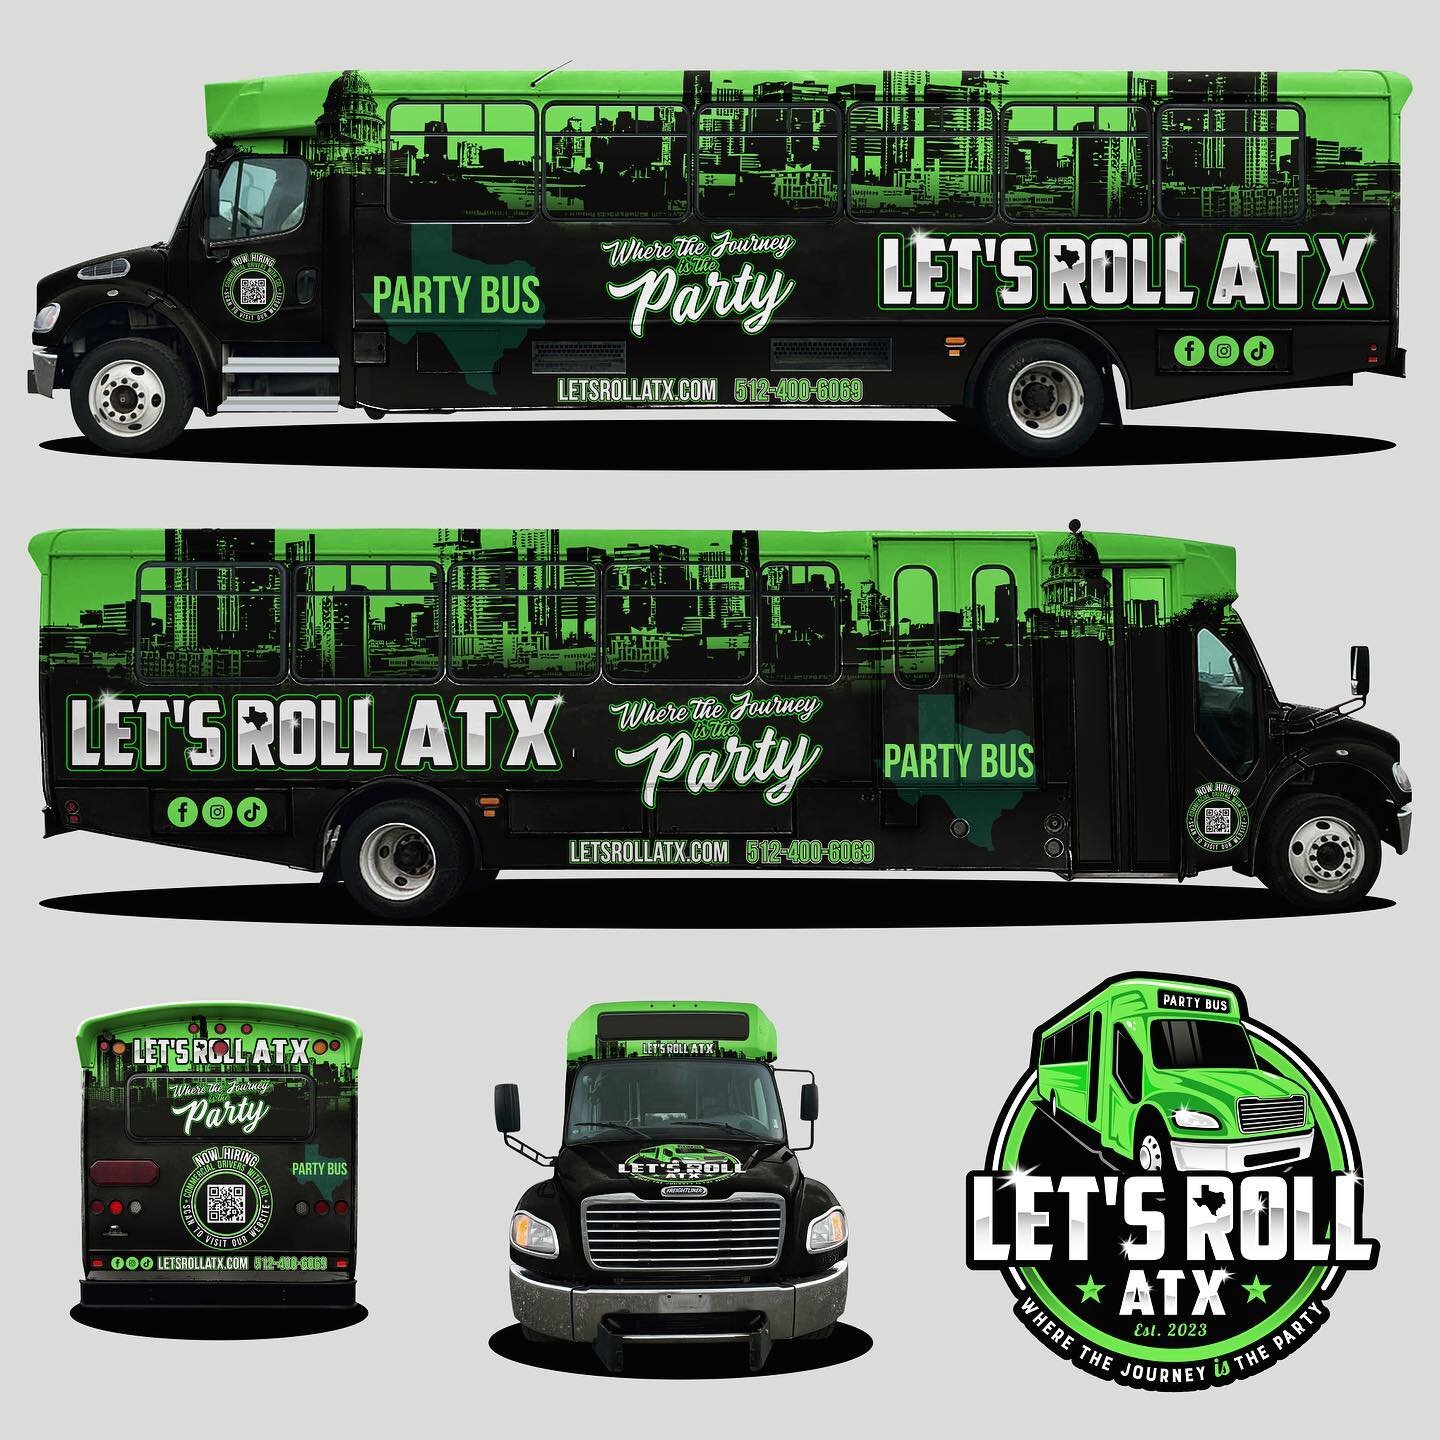 🚌✨ Unveiling the Ride of a Lifetime!  Meet our newly wrapped party bus, &lsquo;Let&rsquo;s Roll ATX&rsquo;! Bringing a new level of fun to the streets of Austin, TX. Get ready to roll in style! 🌆🎶 

#LetsRollATX #AustinTX #PartyBusAustin #AustinPa